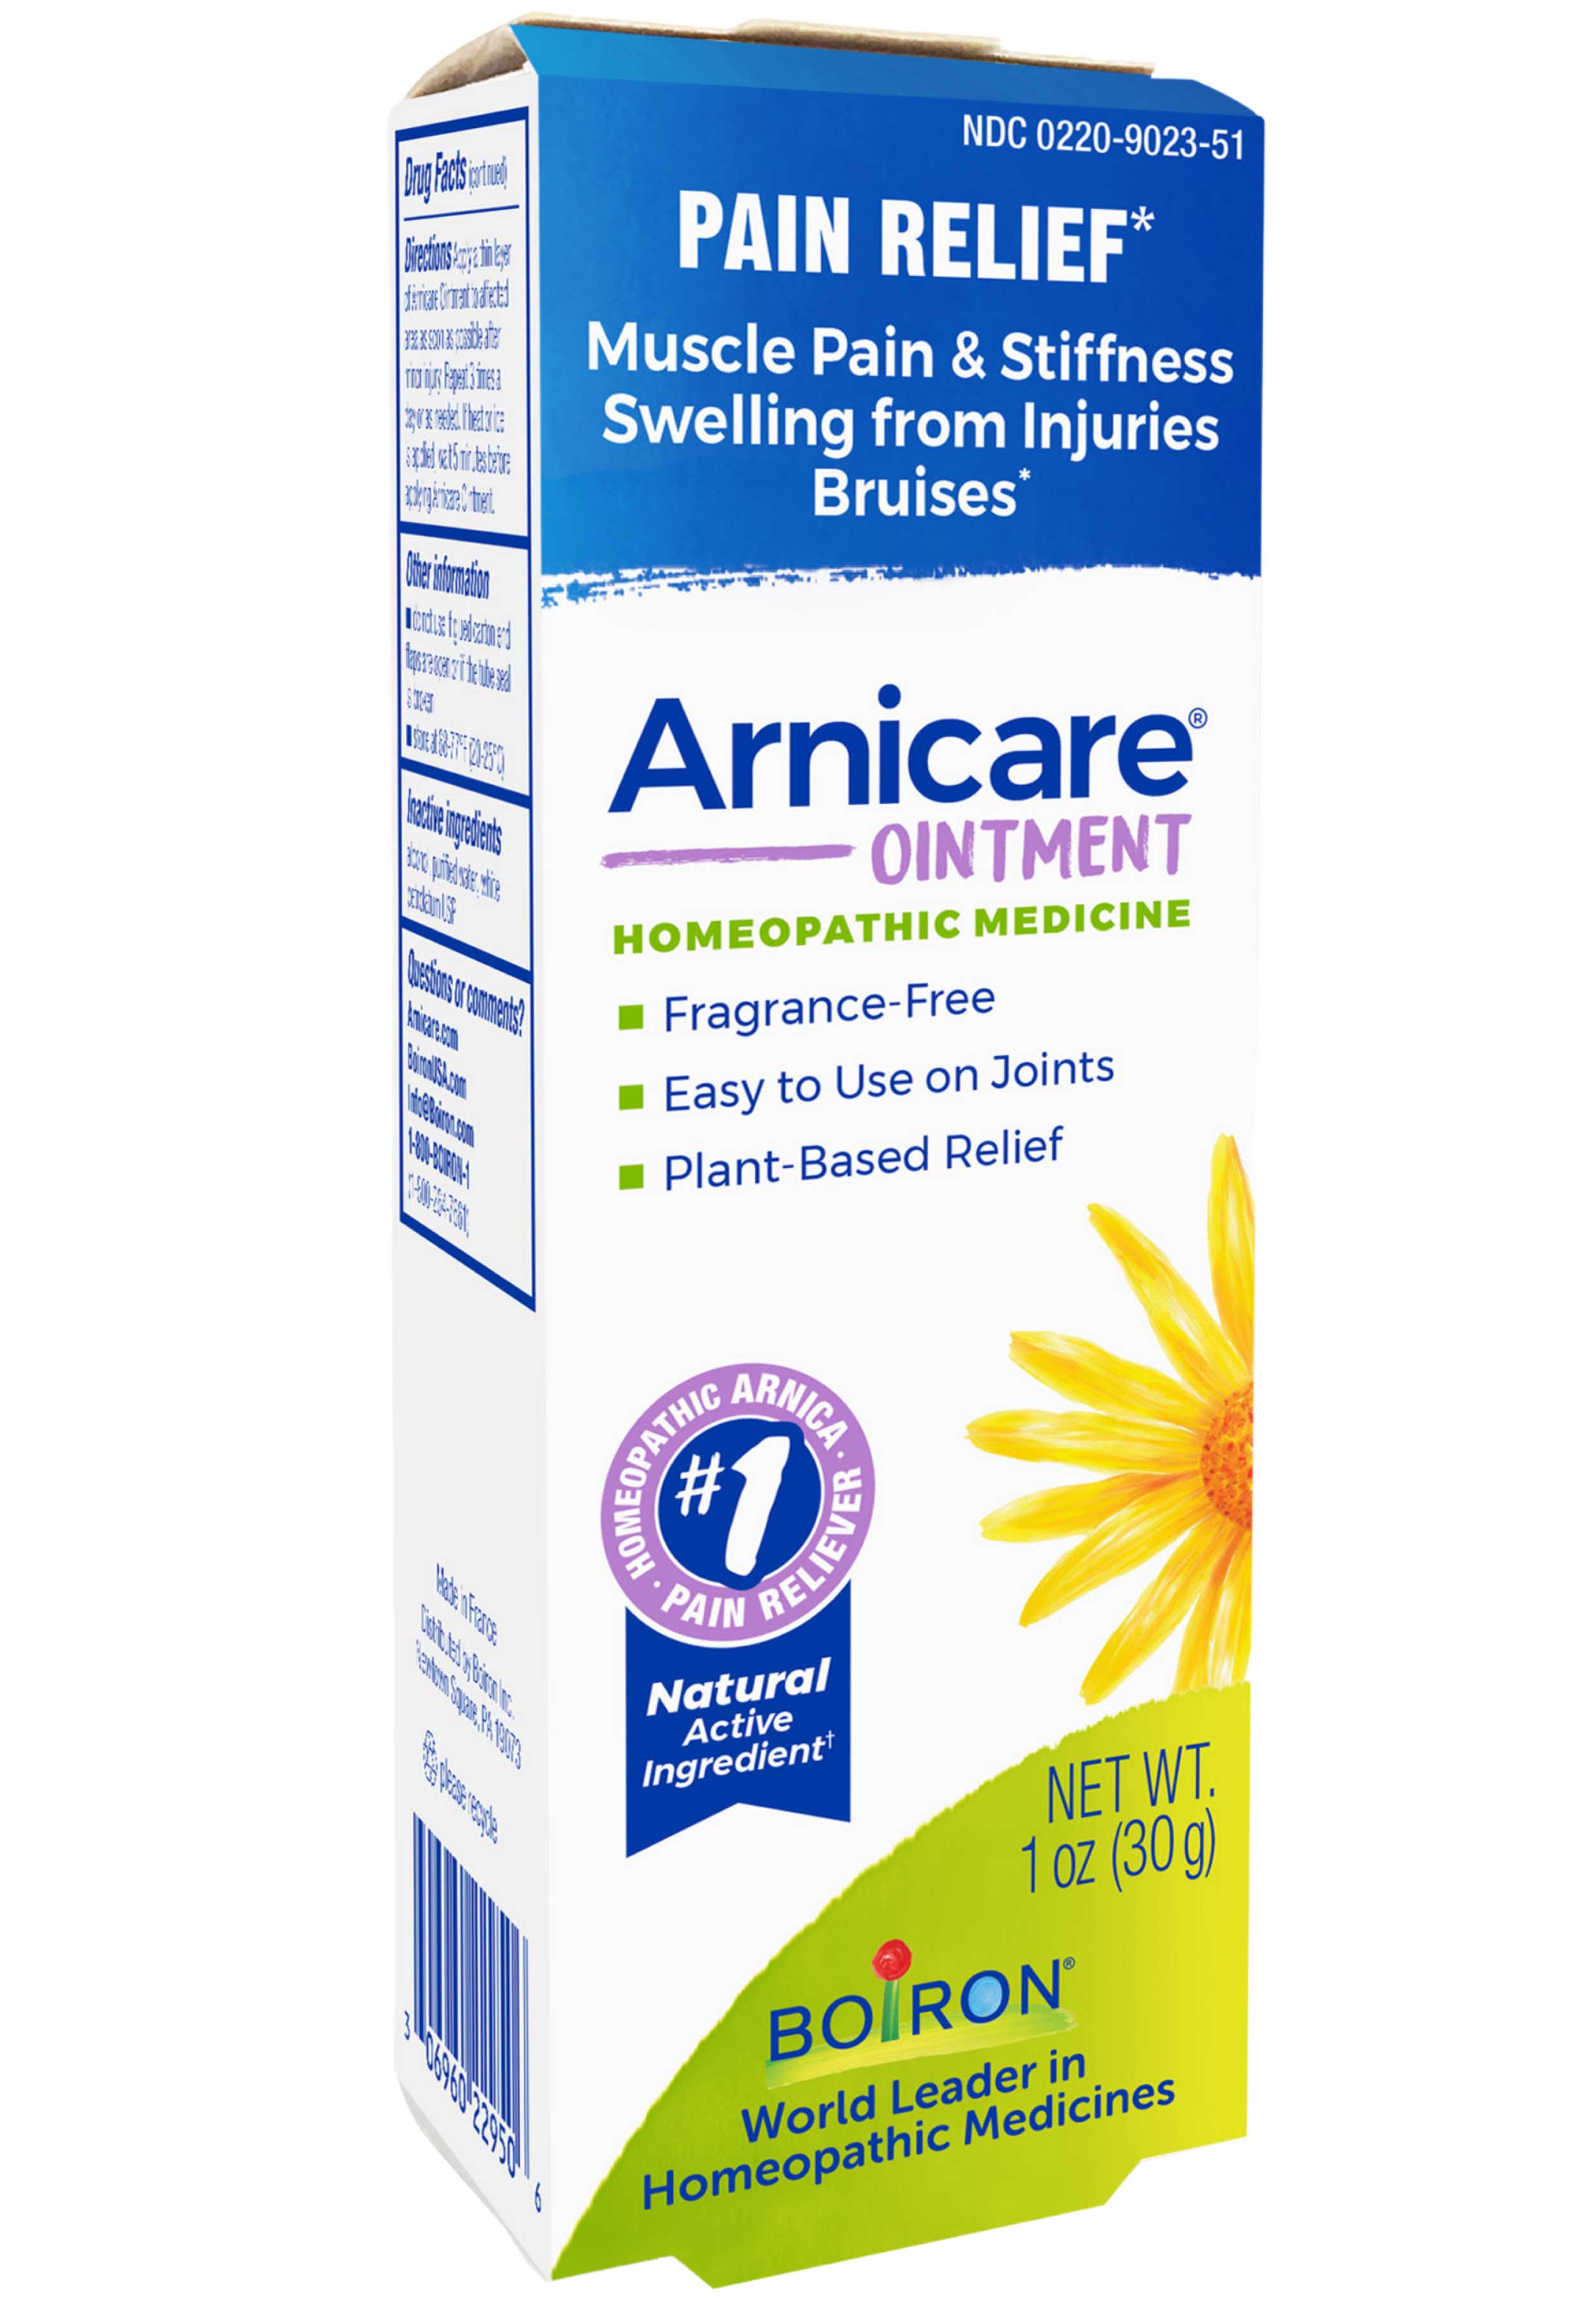 Boiron Homeopathics Arnicare Ointment